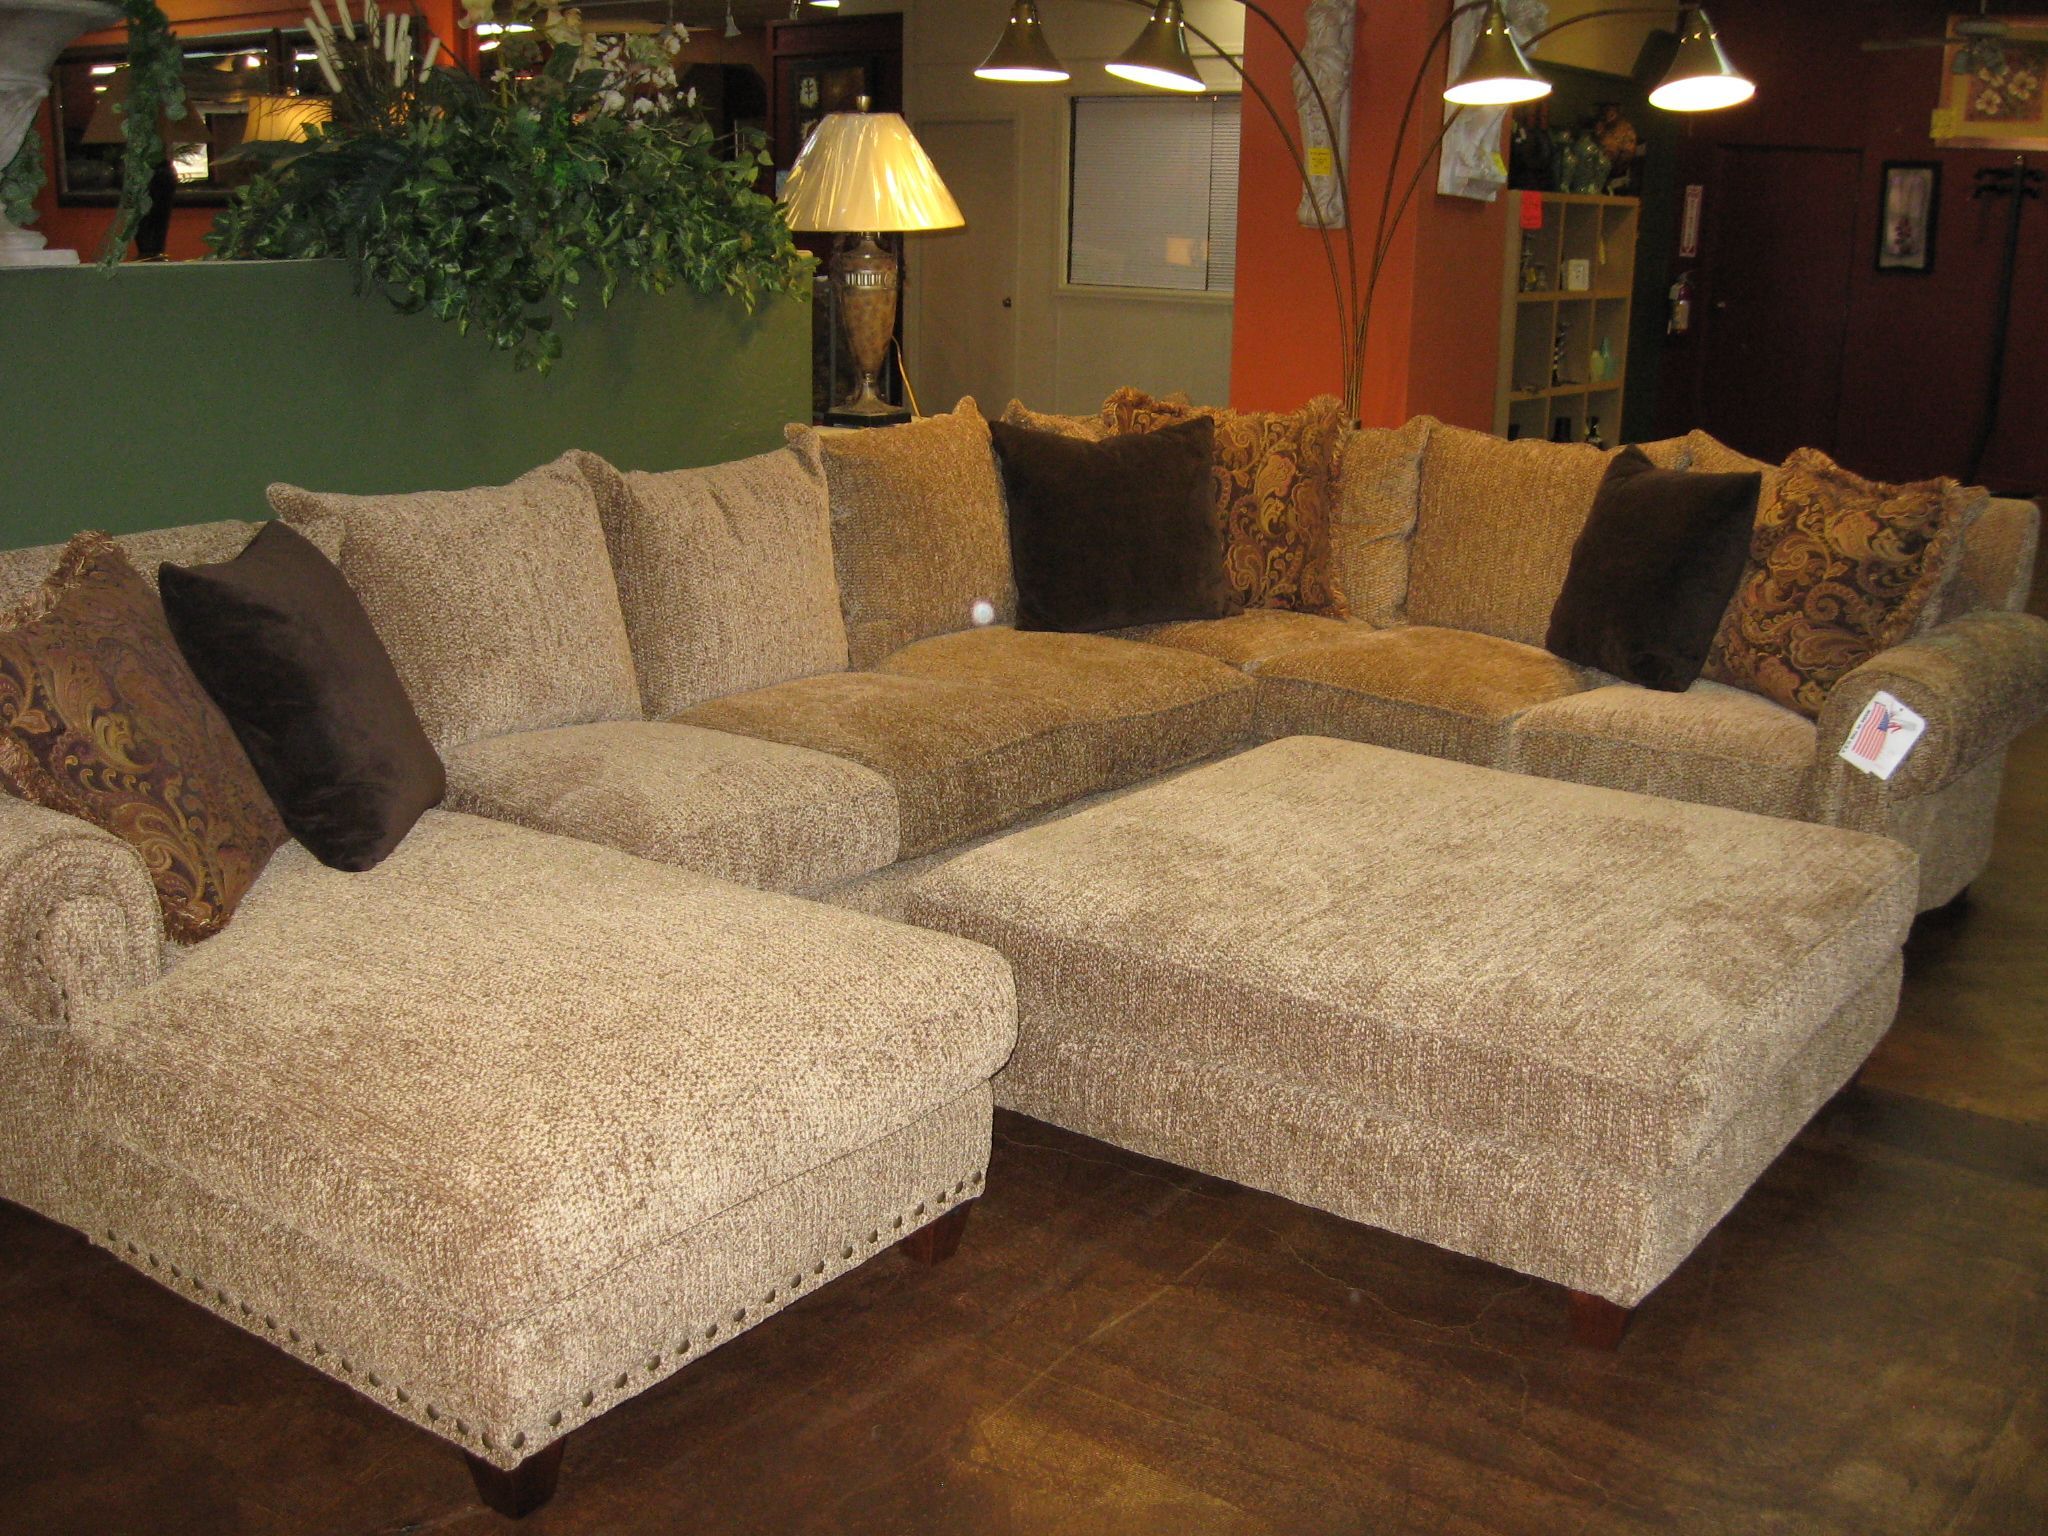 Robert Michael Rocky Mountain Sofa & Sectionals Direct Outlet | Large Throughout U Shaped Couches In Beige (Gallery 2 of 20)